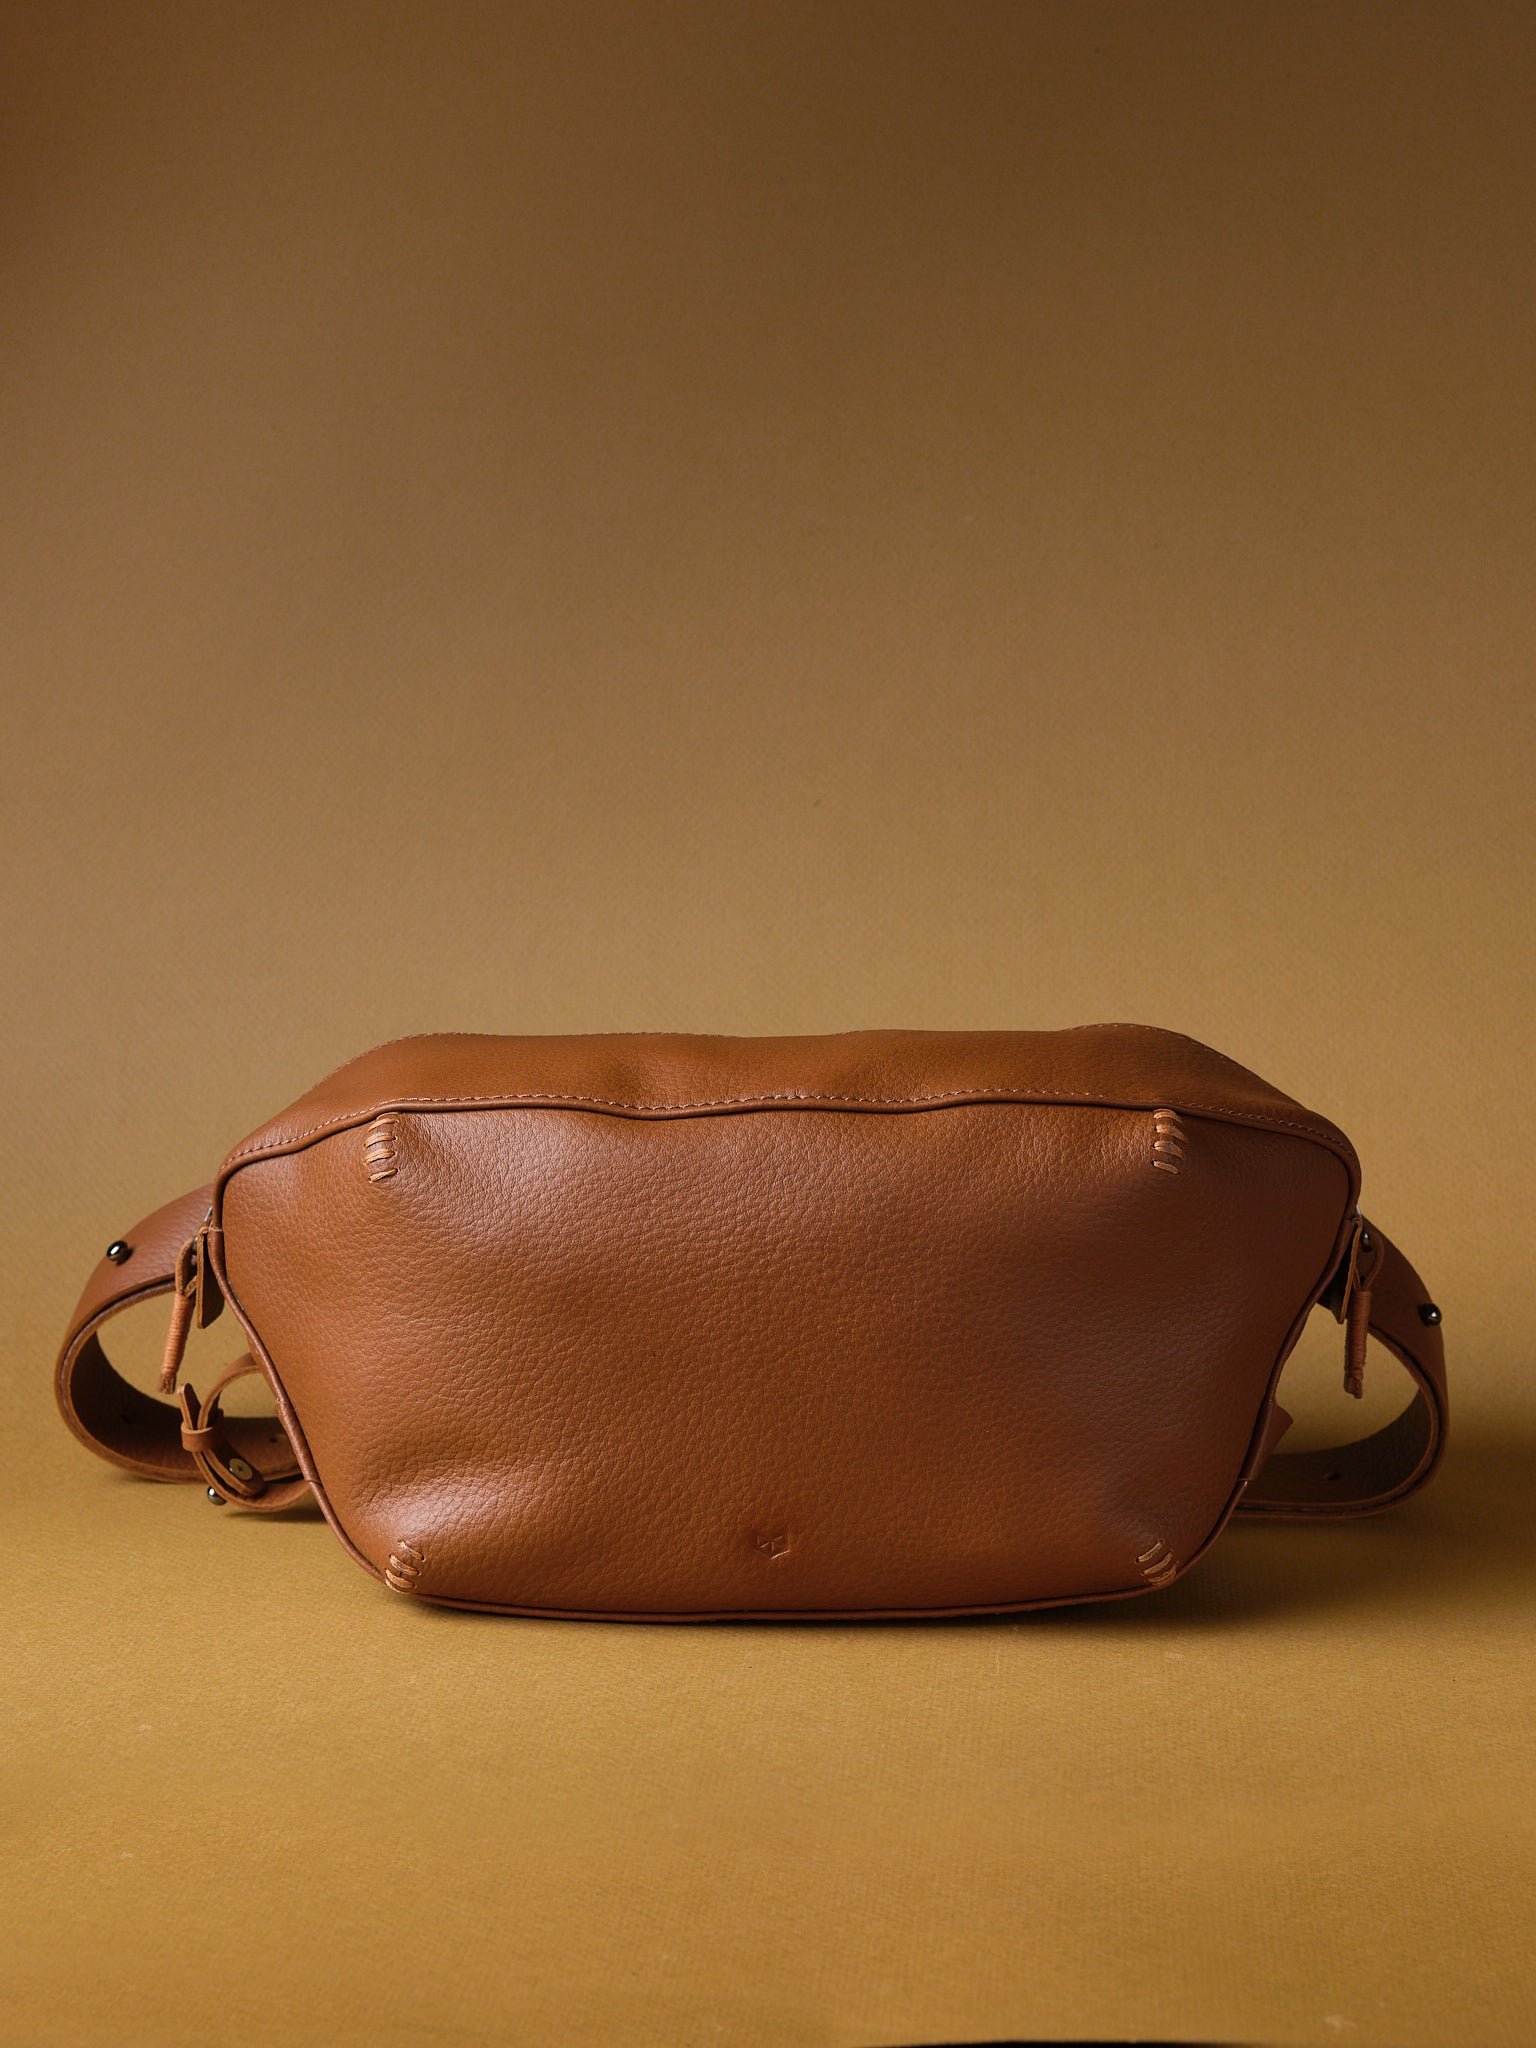 Fanny Pack. Urban Sling Bag Tan by Capra Leather